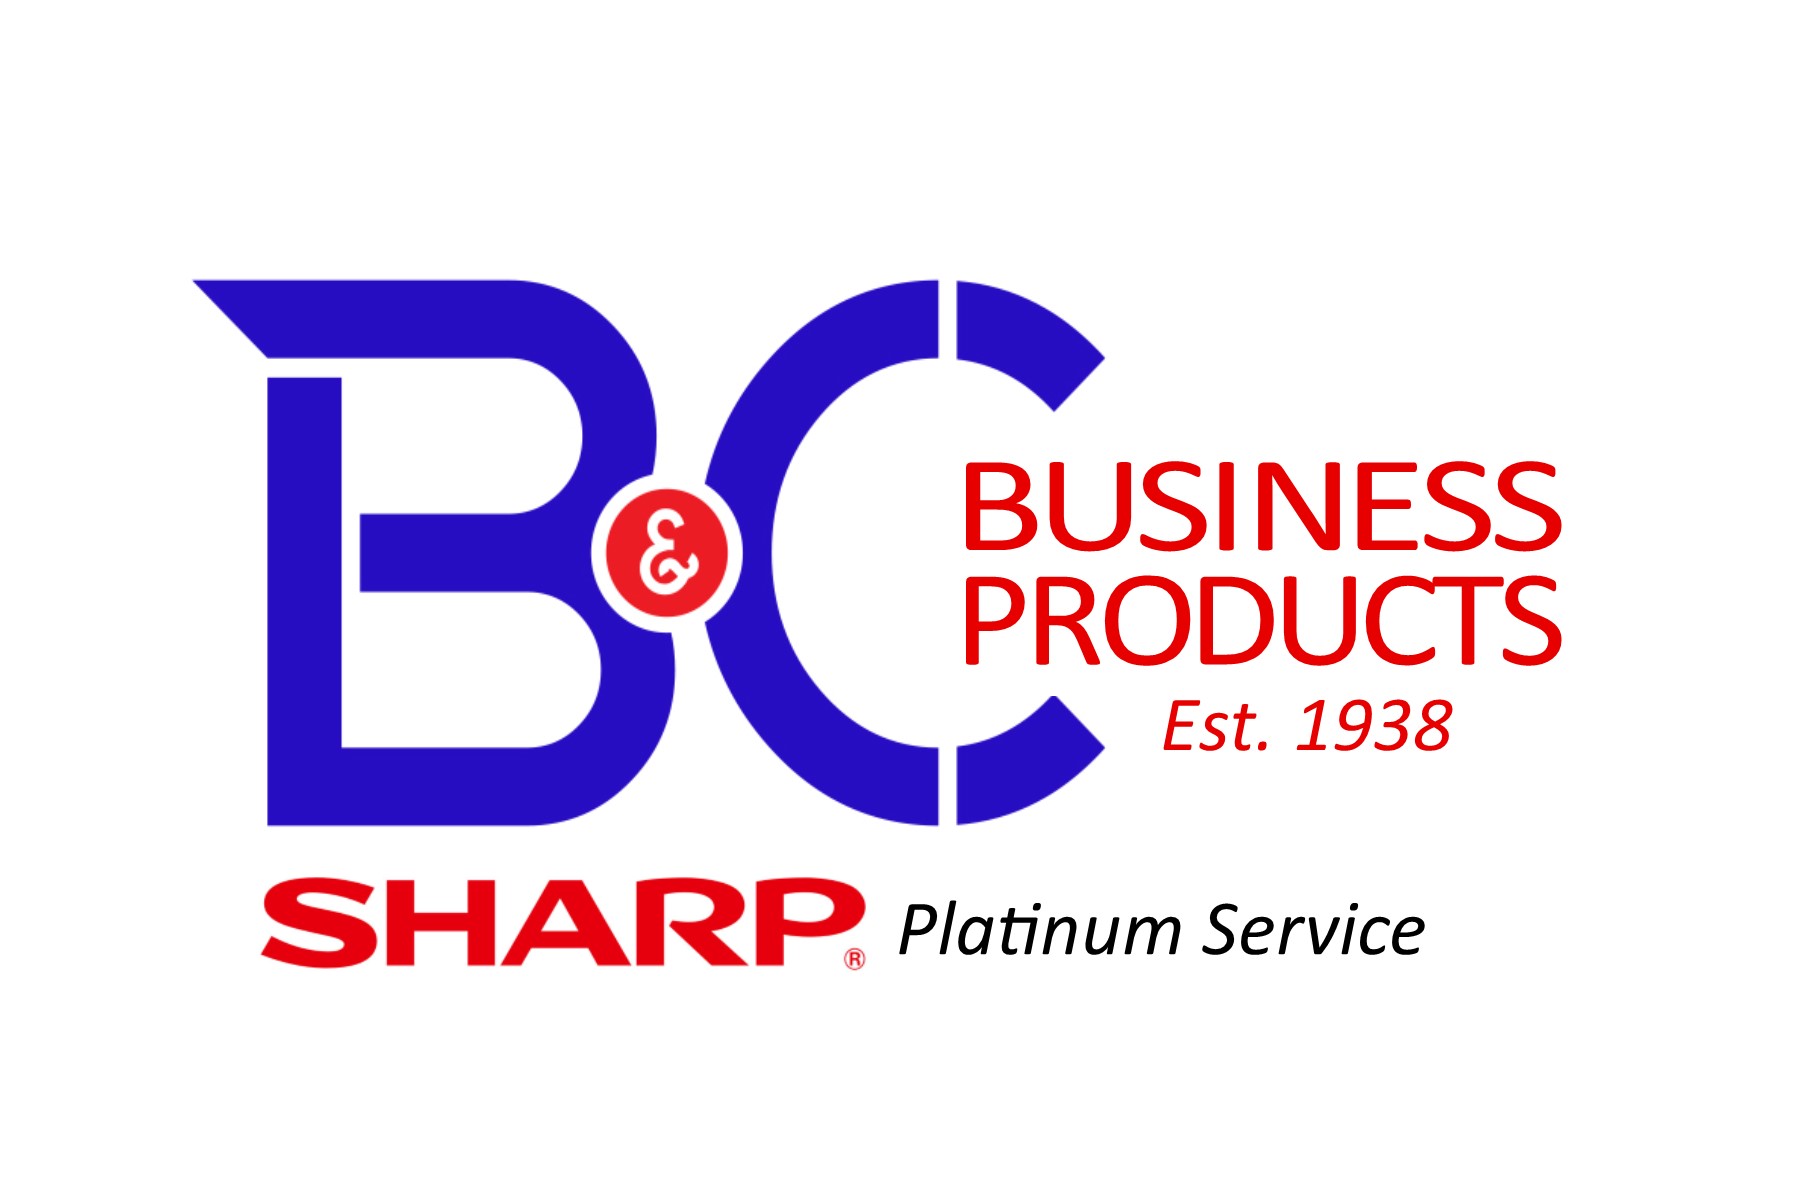 B&C Business Products, Inc.